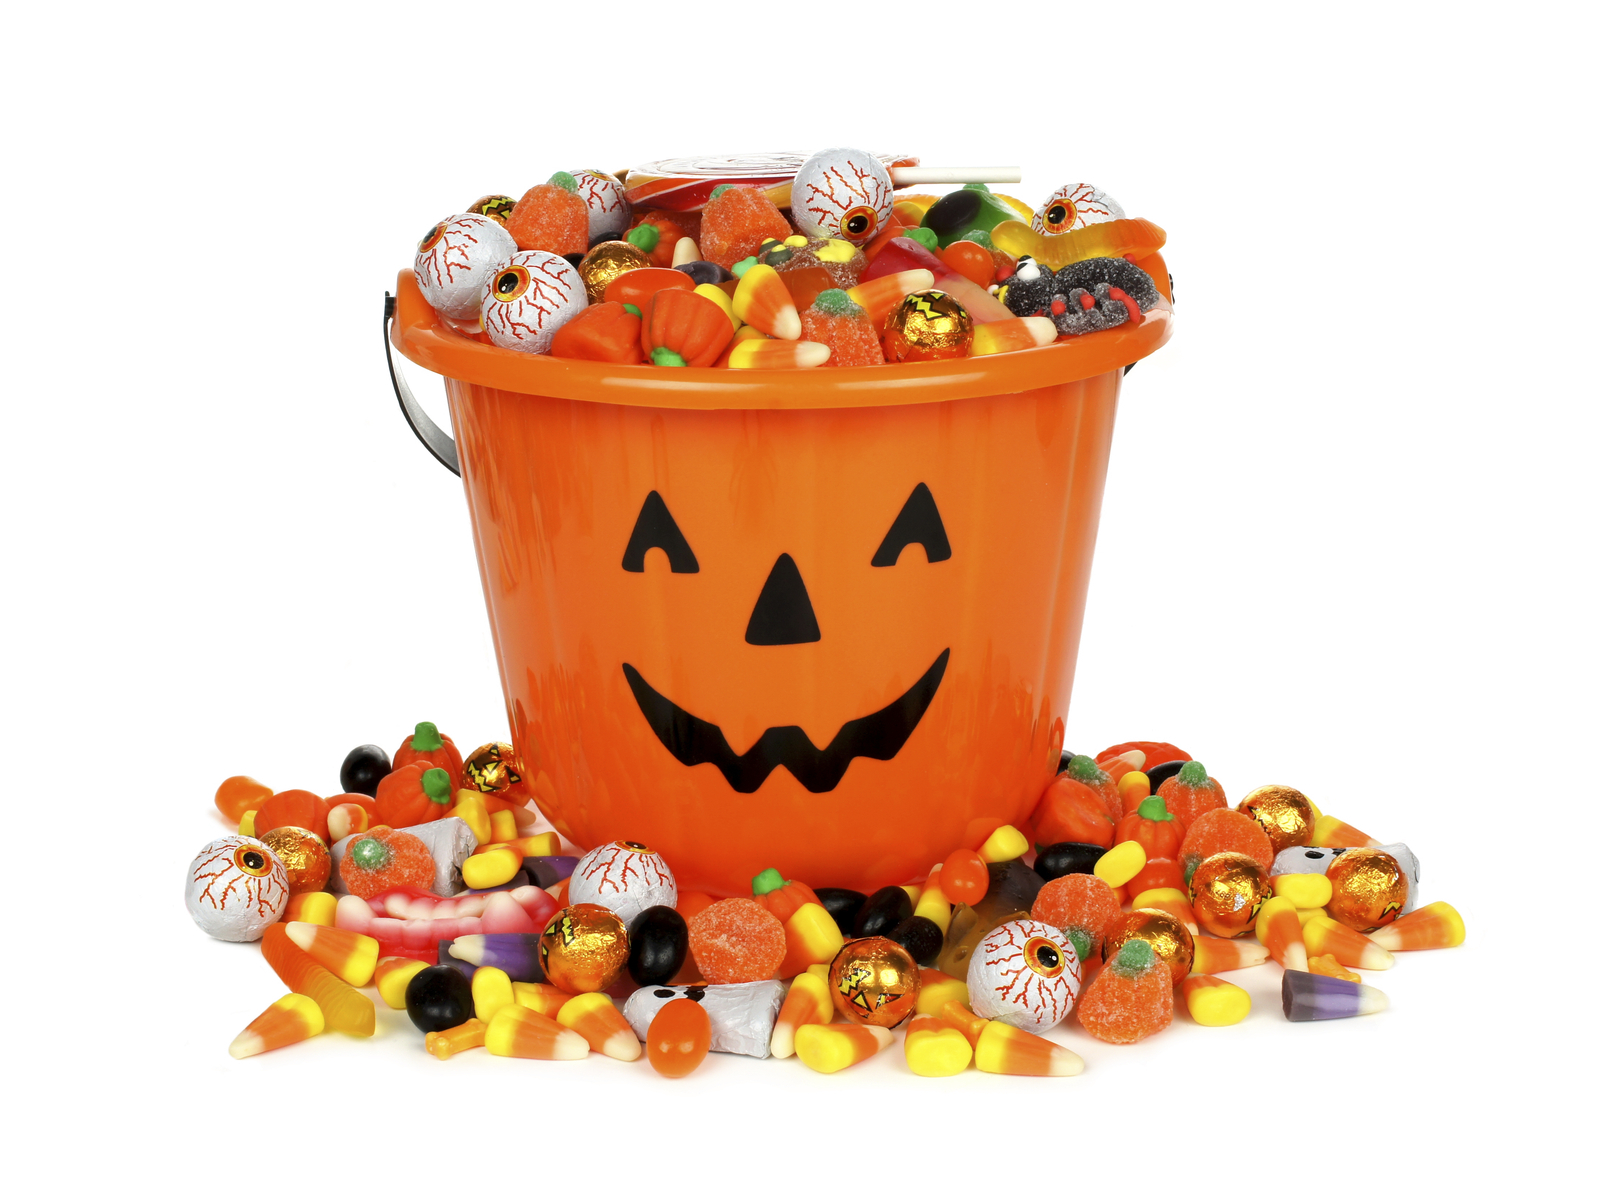 8 Things To Do With Your Halloween Candy Haul